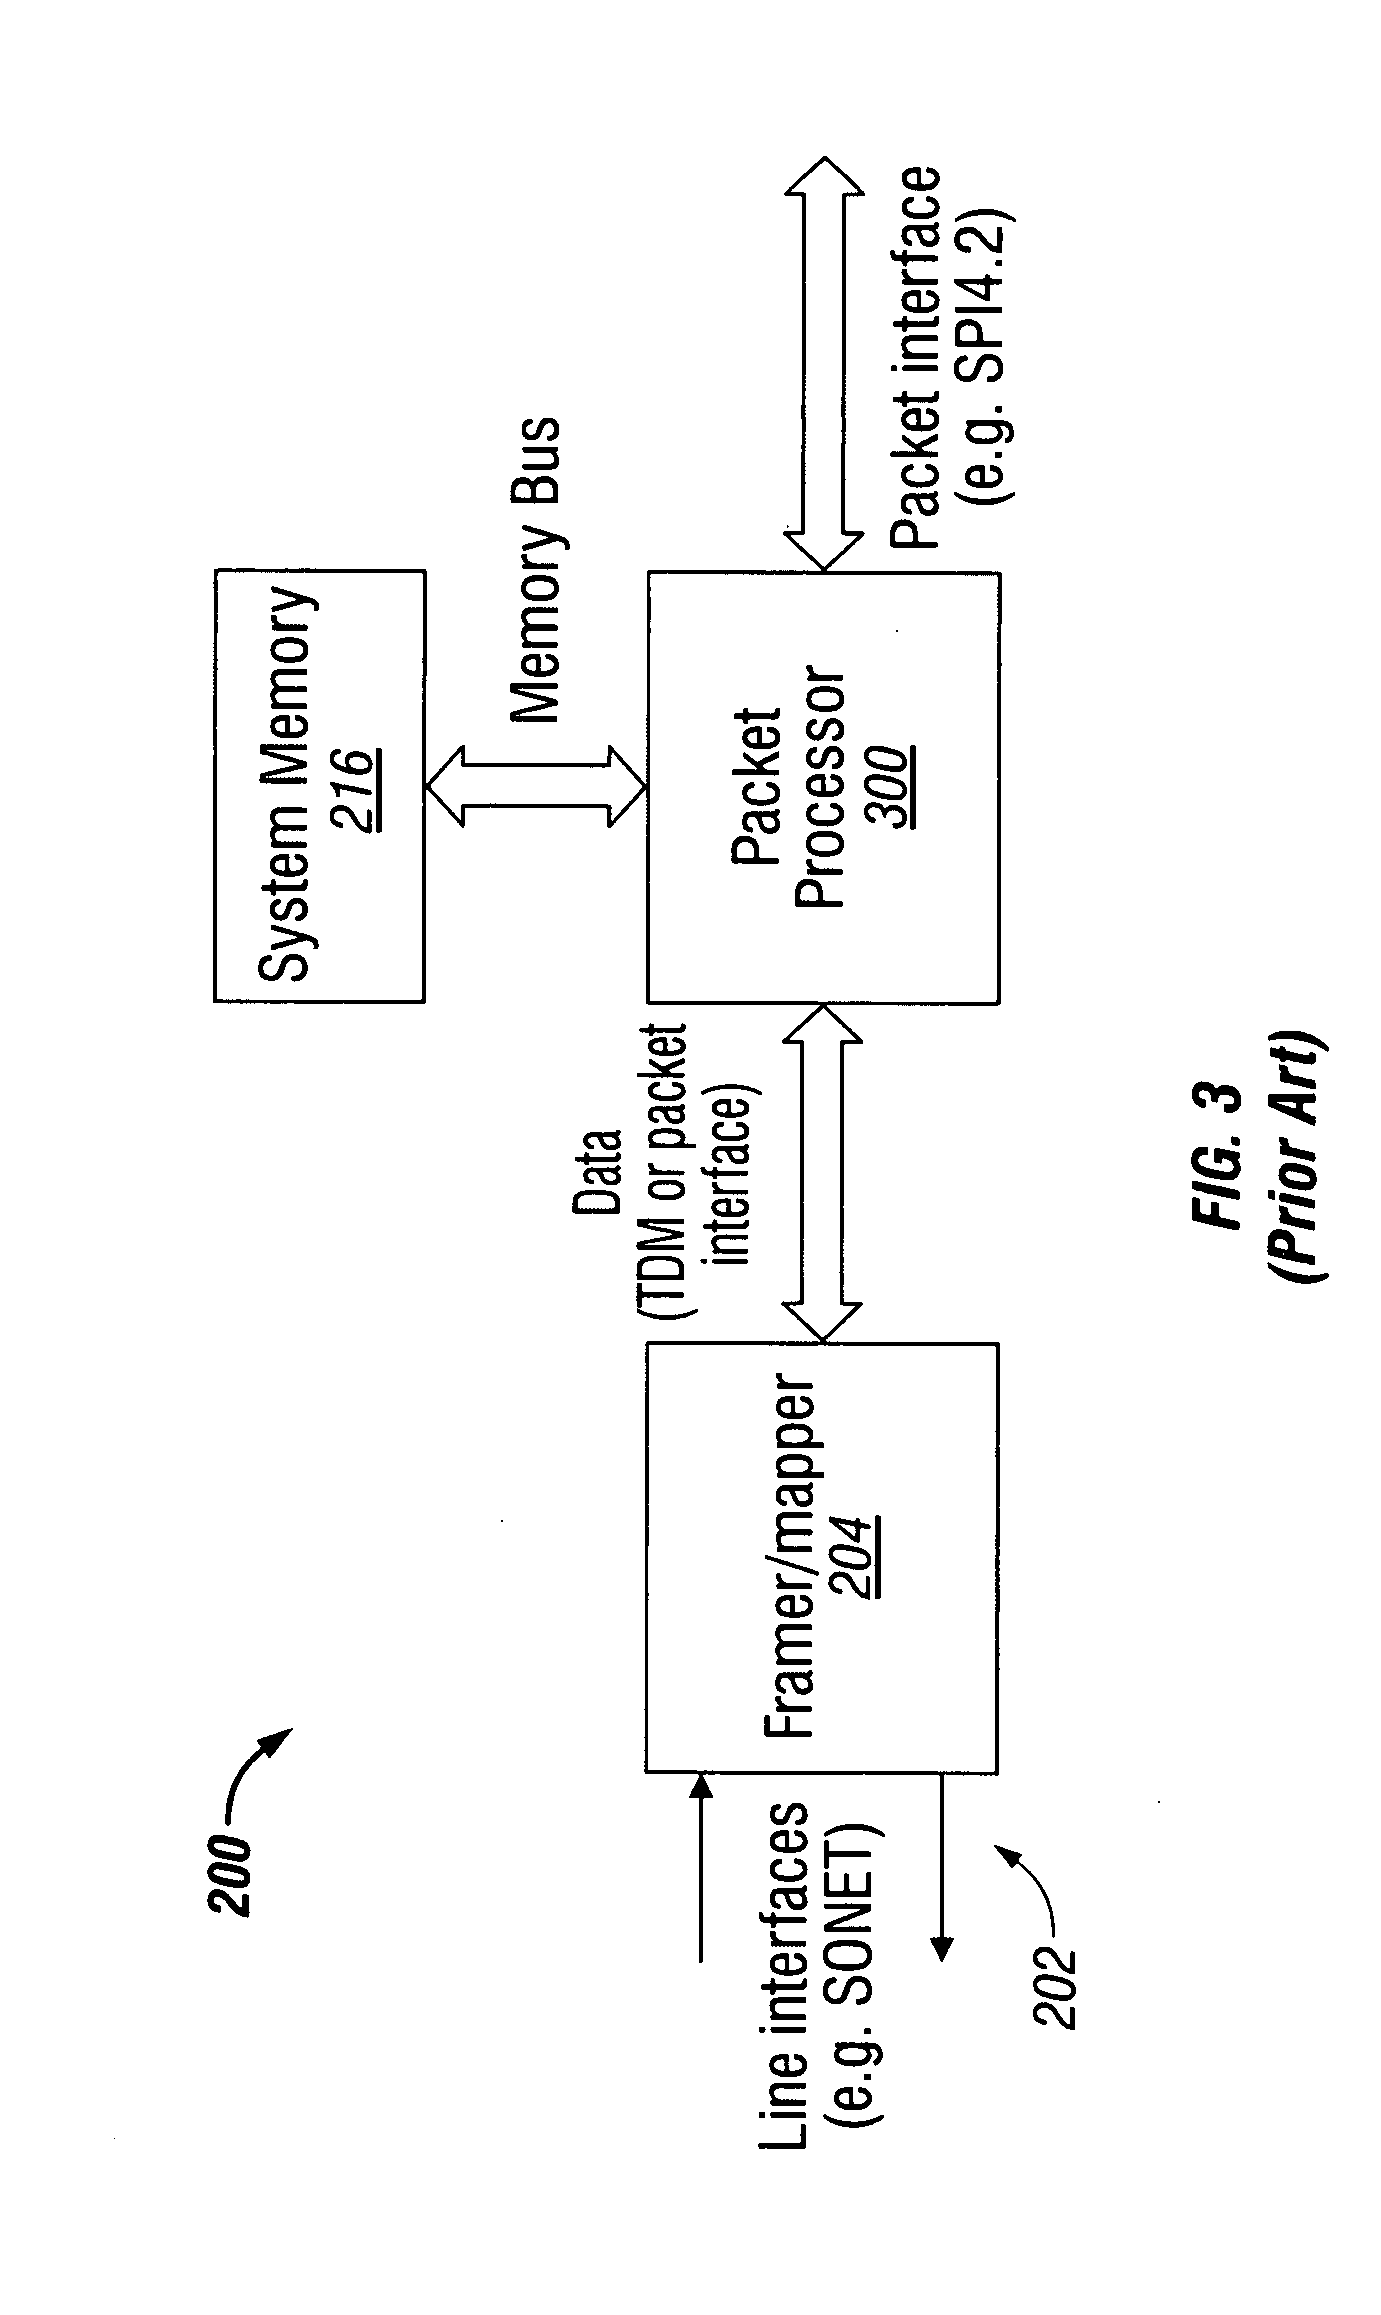 Multiservice system and method for packet and time division multiplexed transport